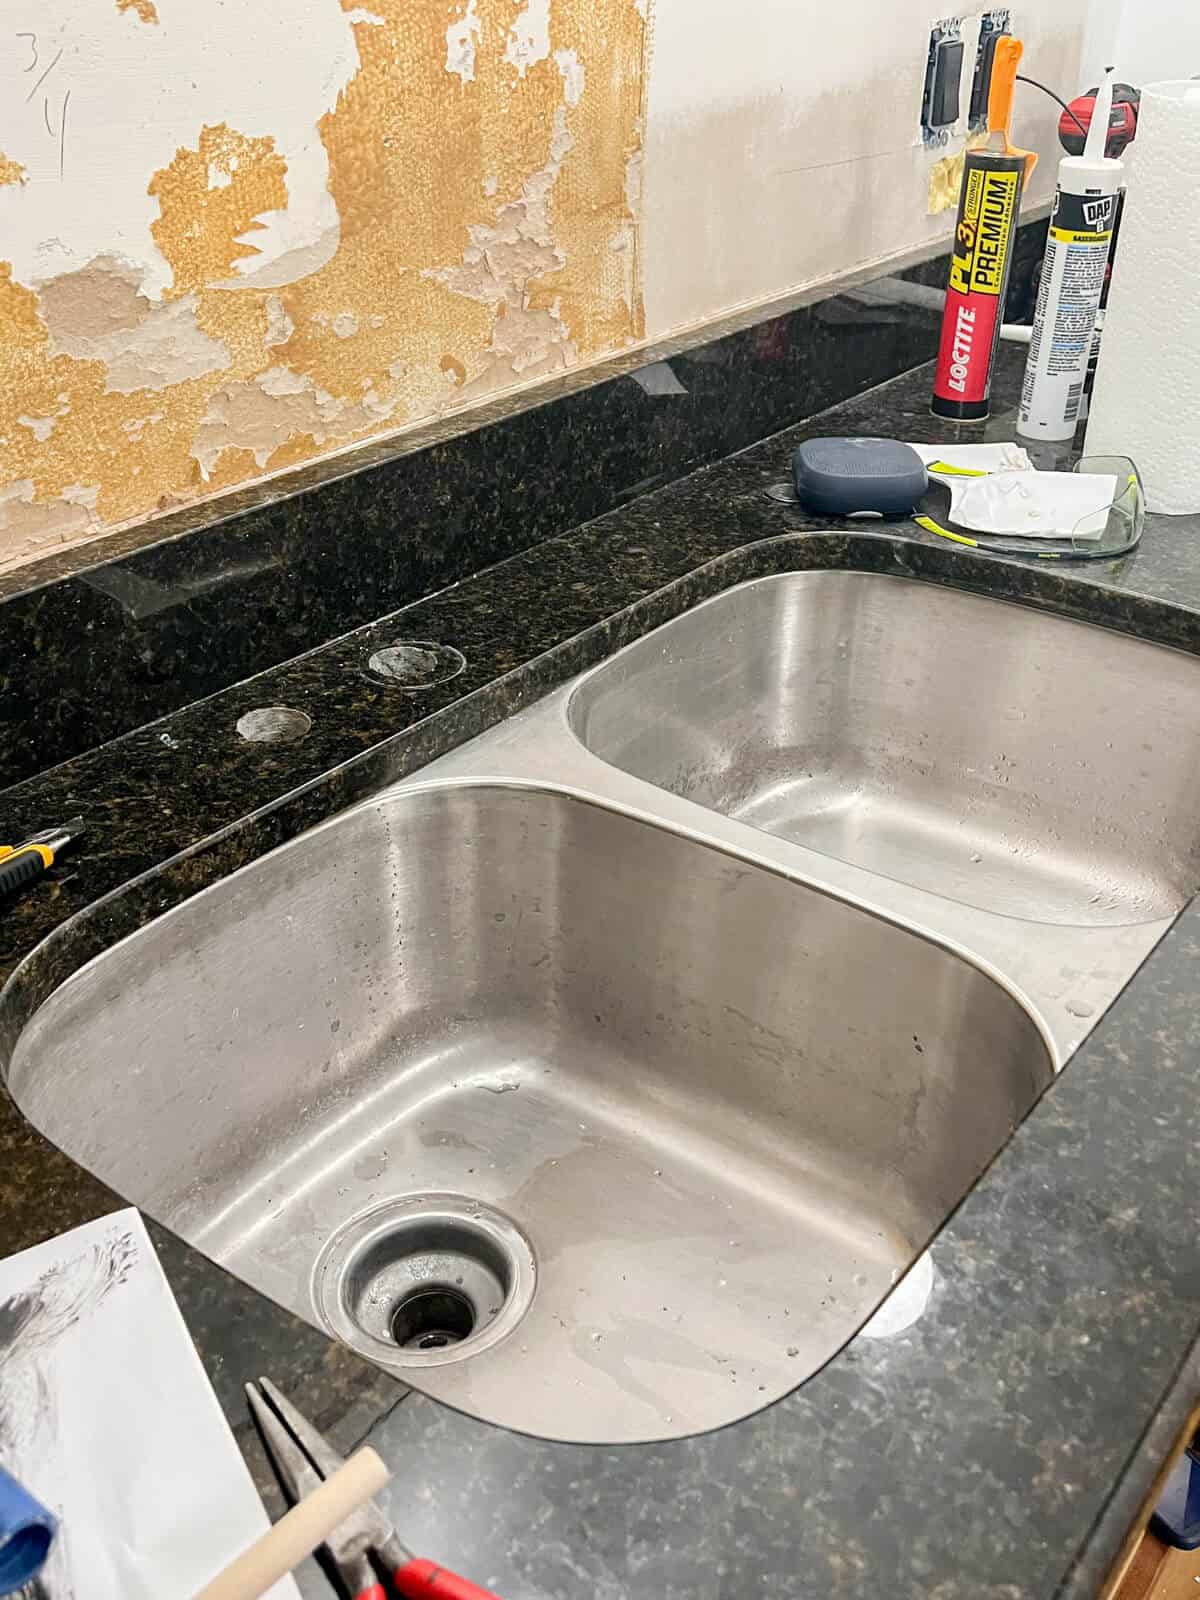 old stainless sink ready to be removed and replaced with a new sink